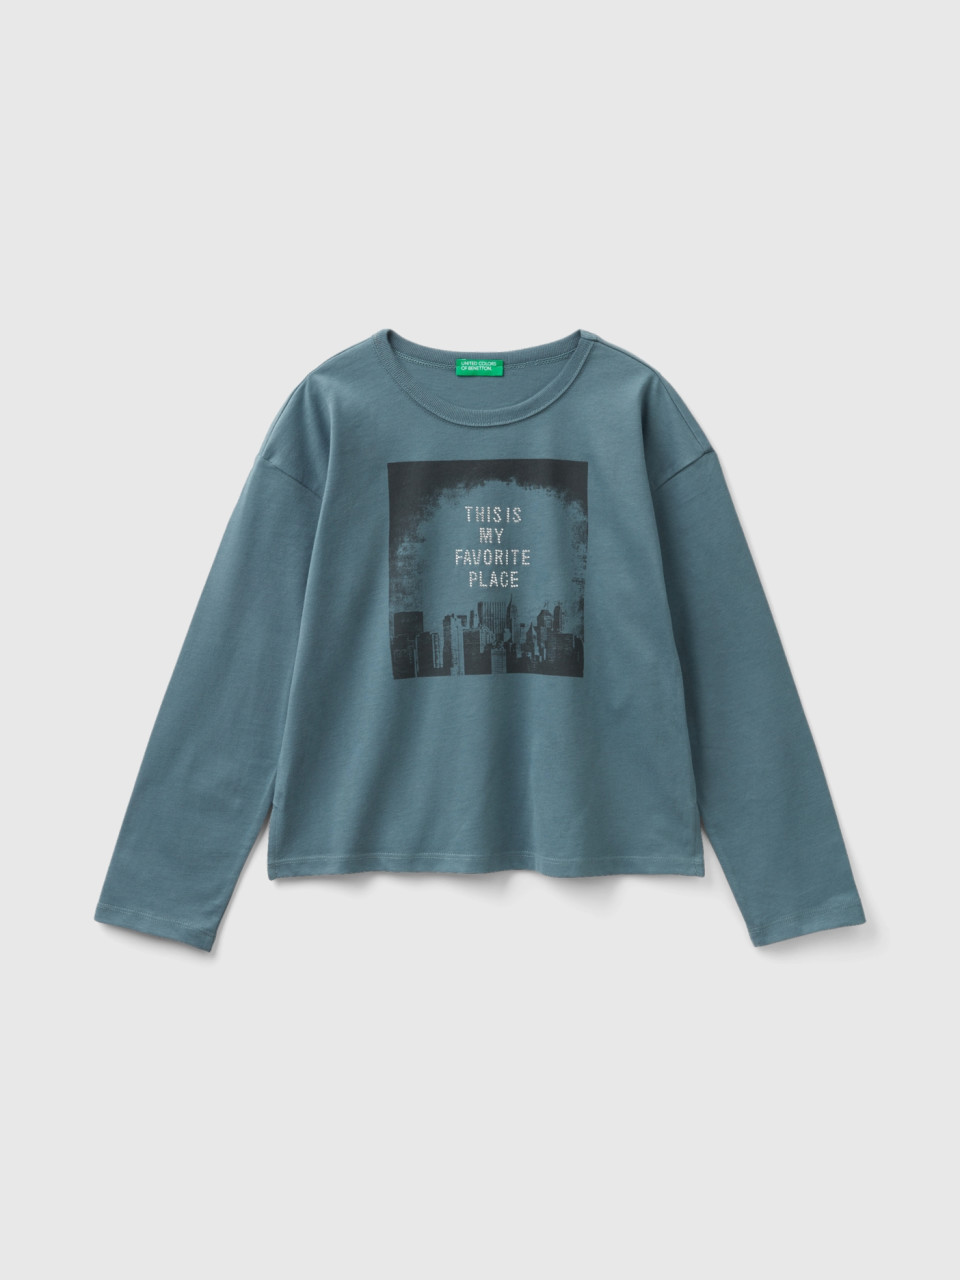 Benetton, T-shirt With Print And Studs, Teal, Kids